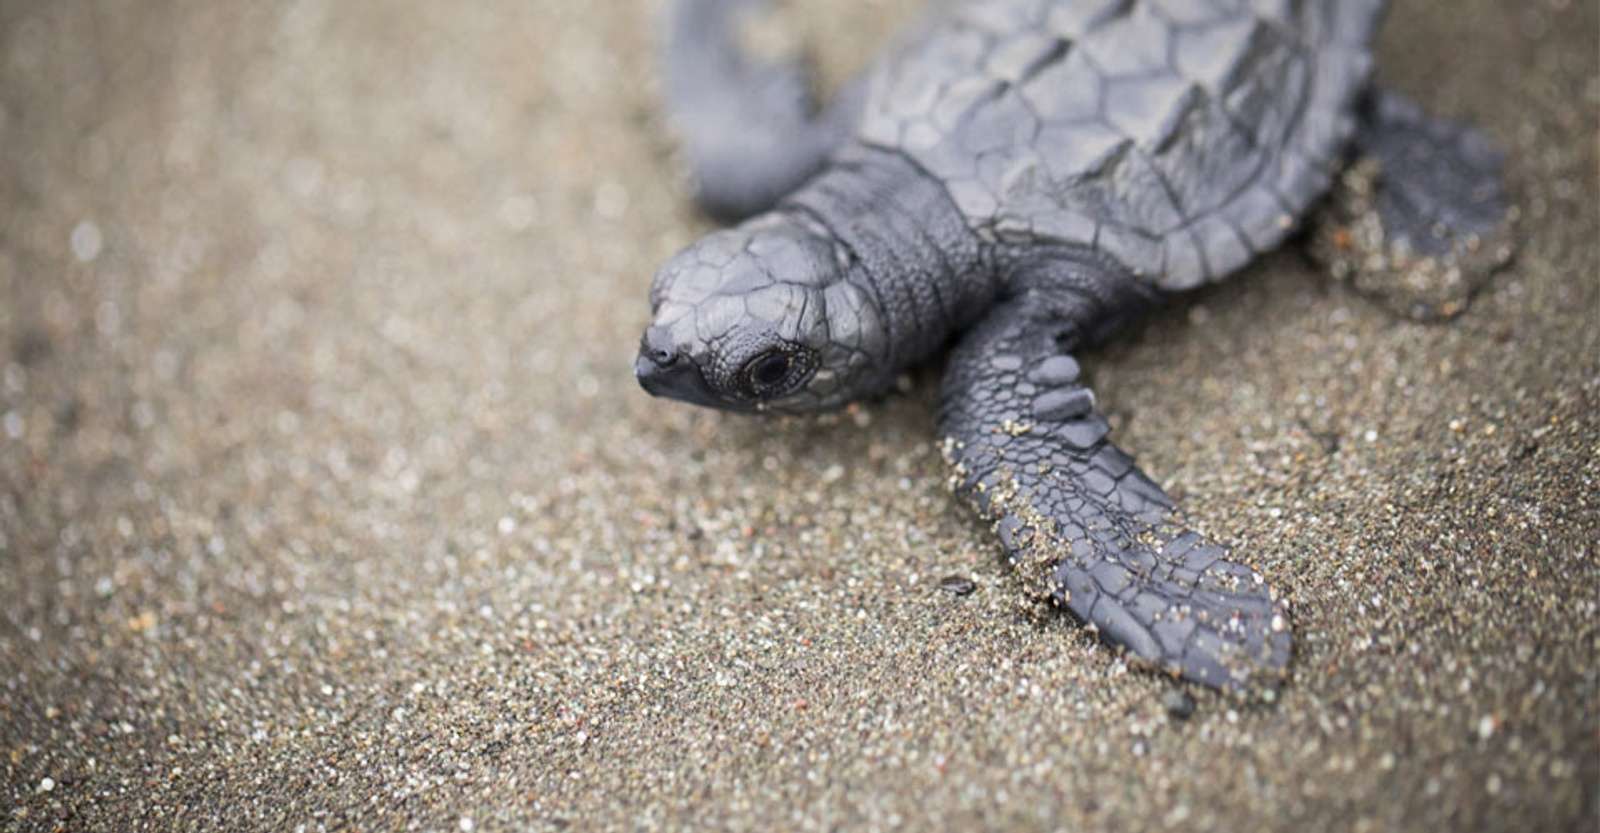 Olive ridley sea turtle hatchling, Tortuguero National Park, Costa Rica.